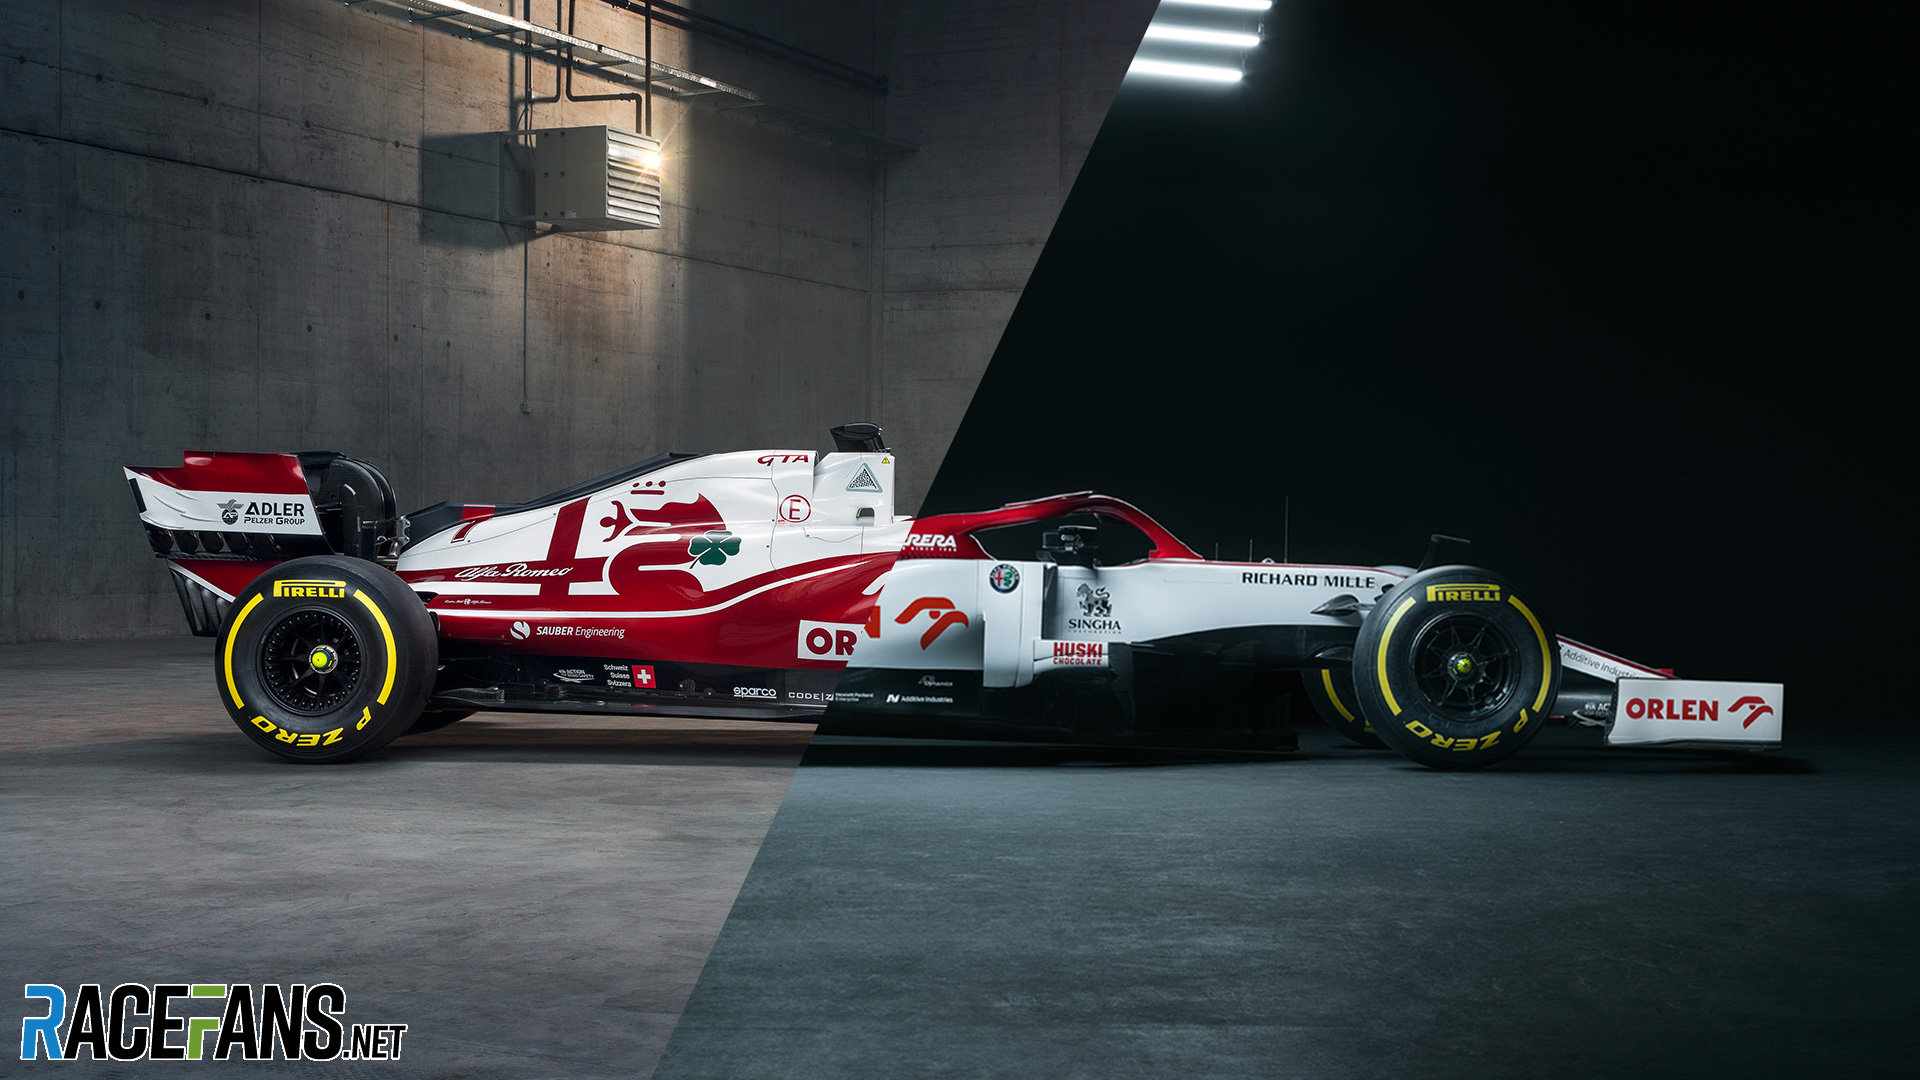 whiskey Unravel hit Sliders: Compare the new Alfa Romeo C41 with last year's car · RaceFans